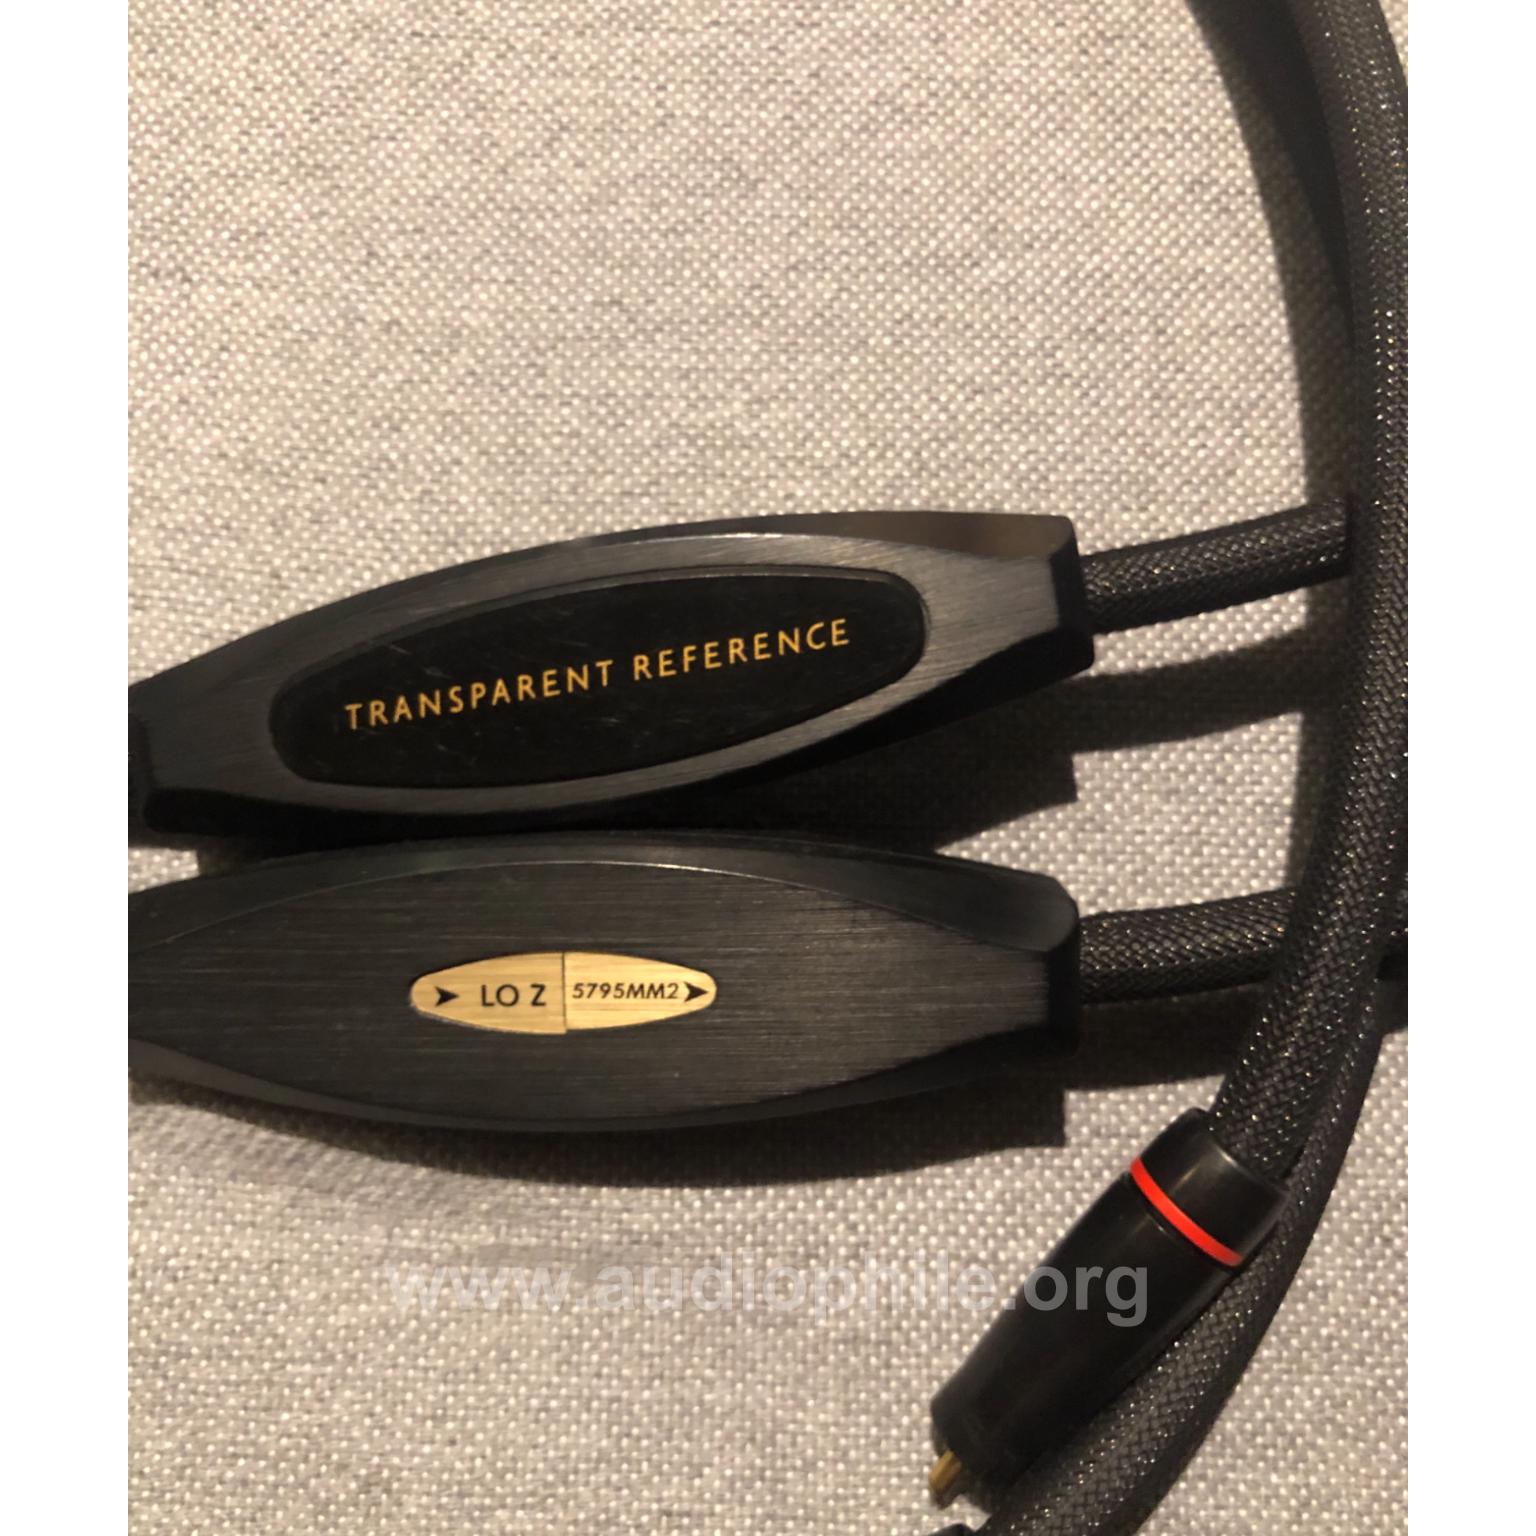 Transparent reference rca interconnects with mm2